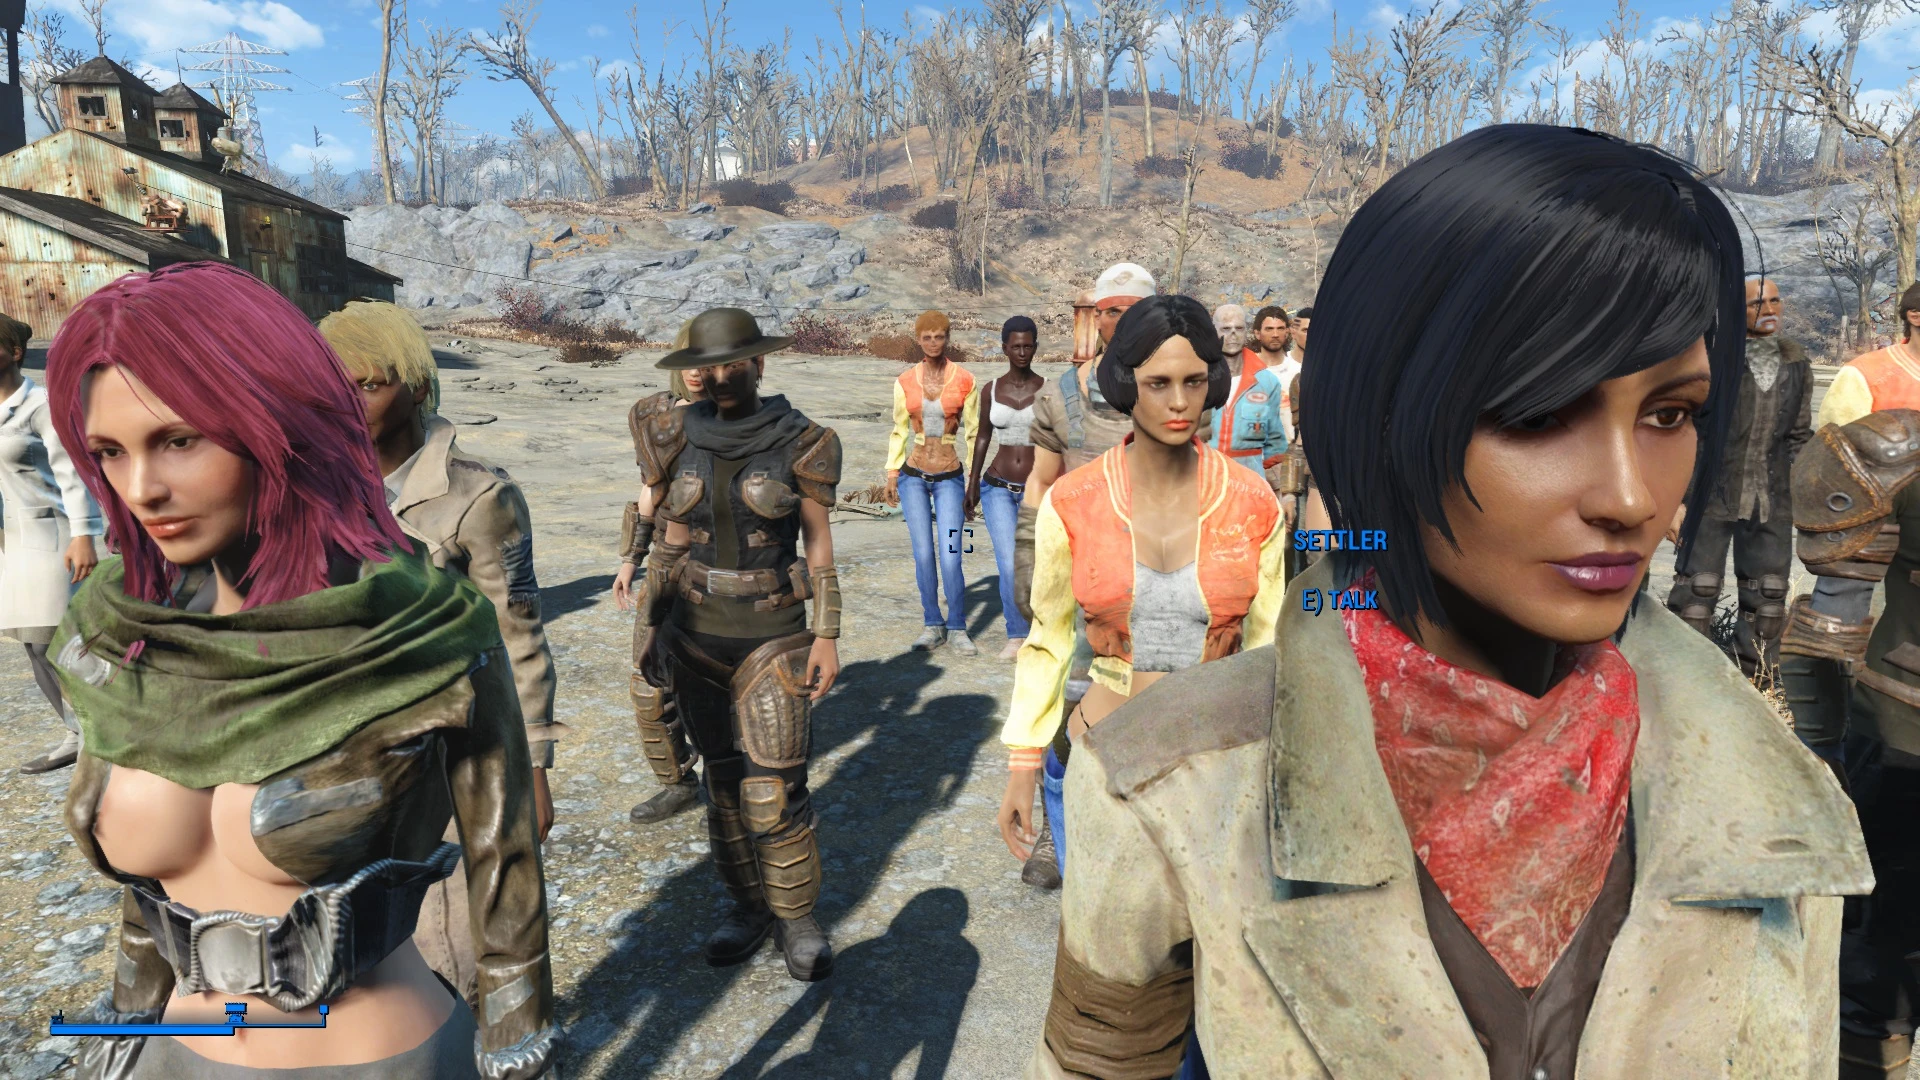 Better Settlers At Fallout 4 Nexus Mods And Community.